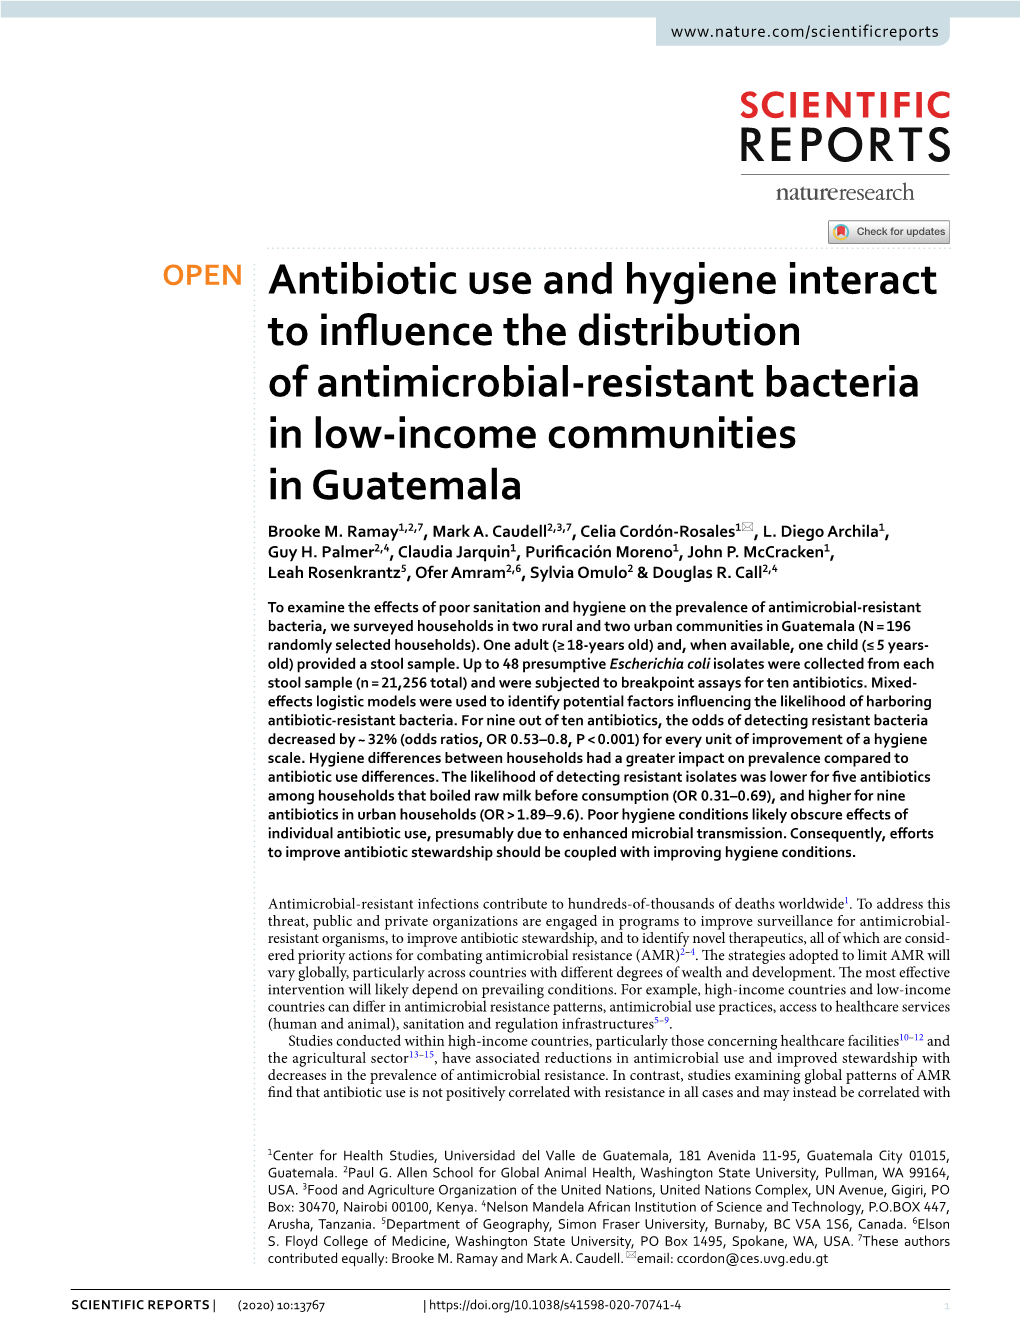 Antibiotic Use and Hygiene Interact to Influence the Distribution Of